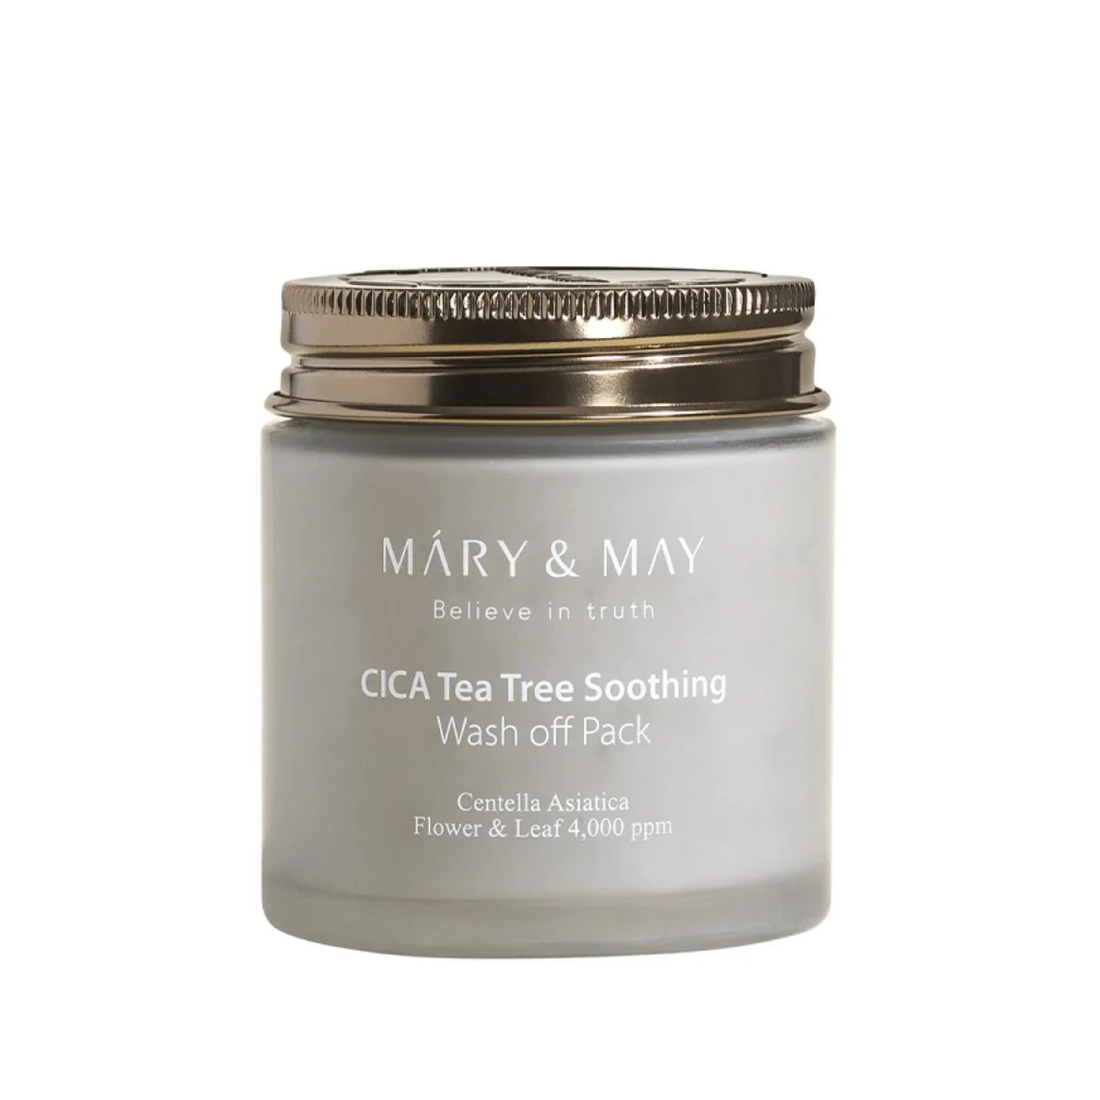 Mary &amp; May CICA TeaTree Soothing Wash off Pack